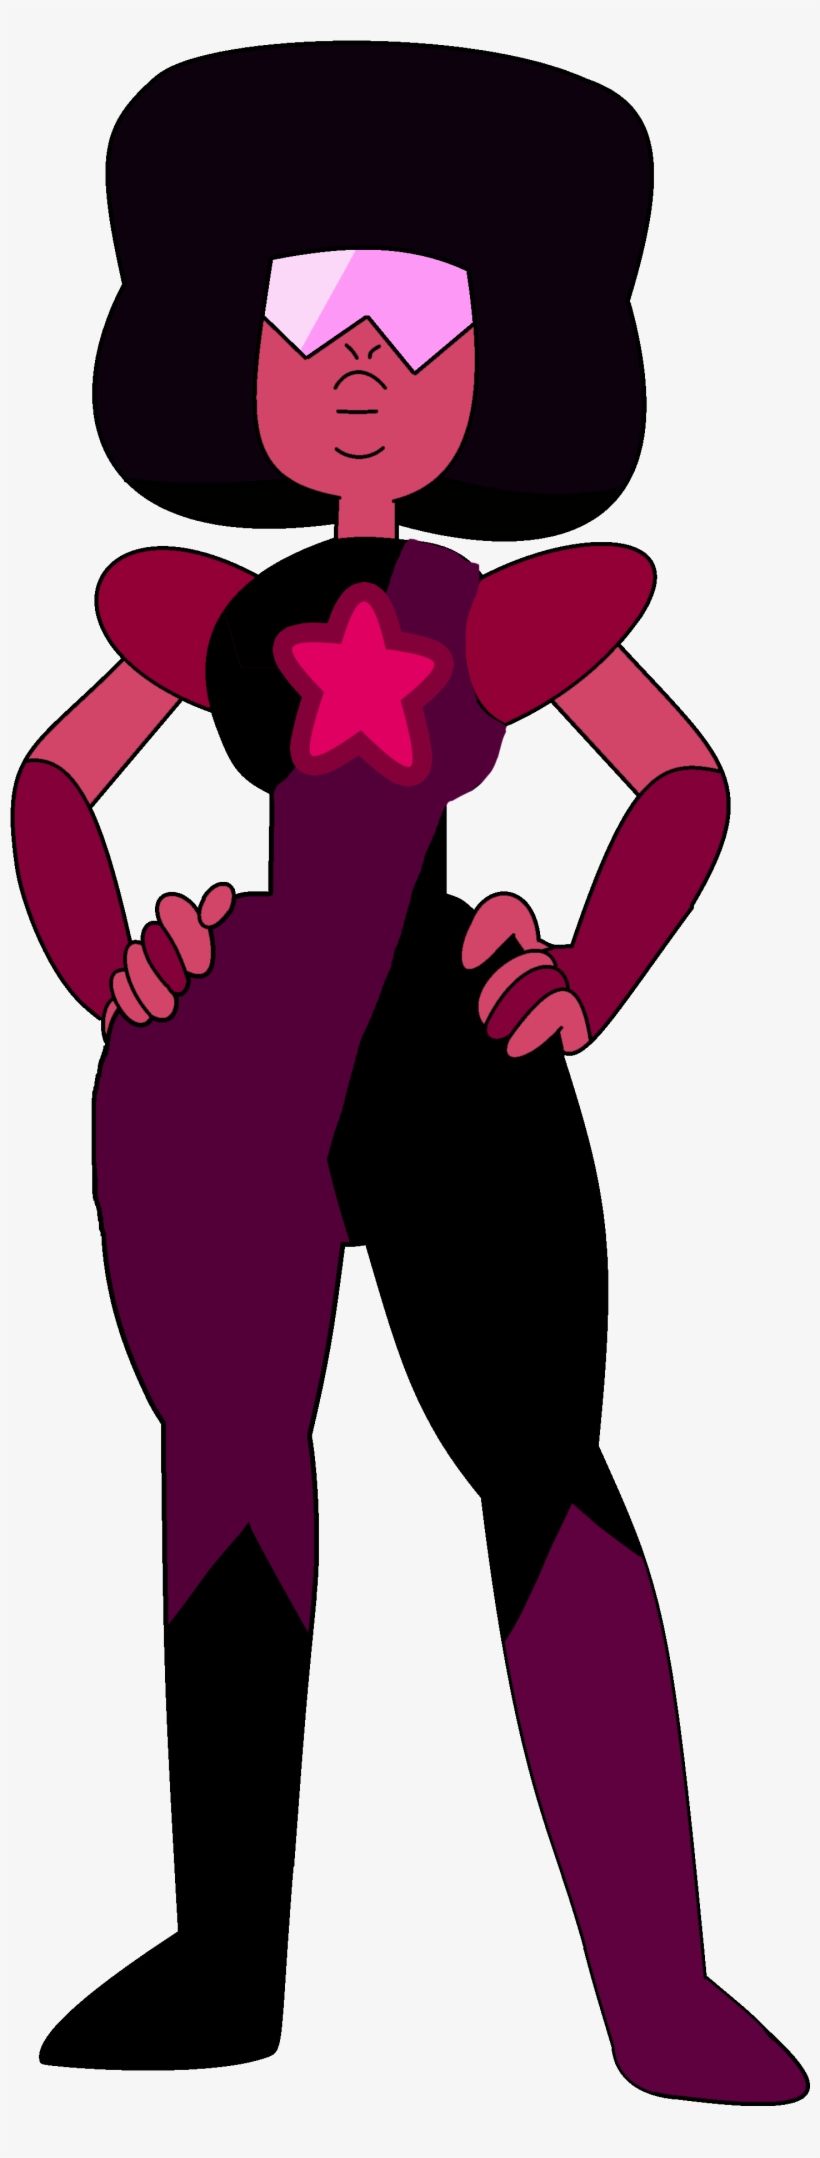 Free Steven Universe Garnet Without Her Glasses - Imagenes De Garnet De Steven Universe, transparent png #1816630